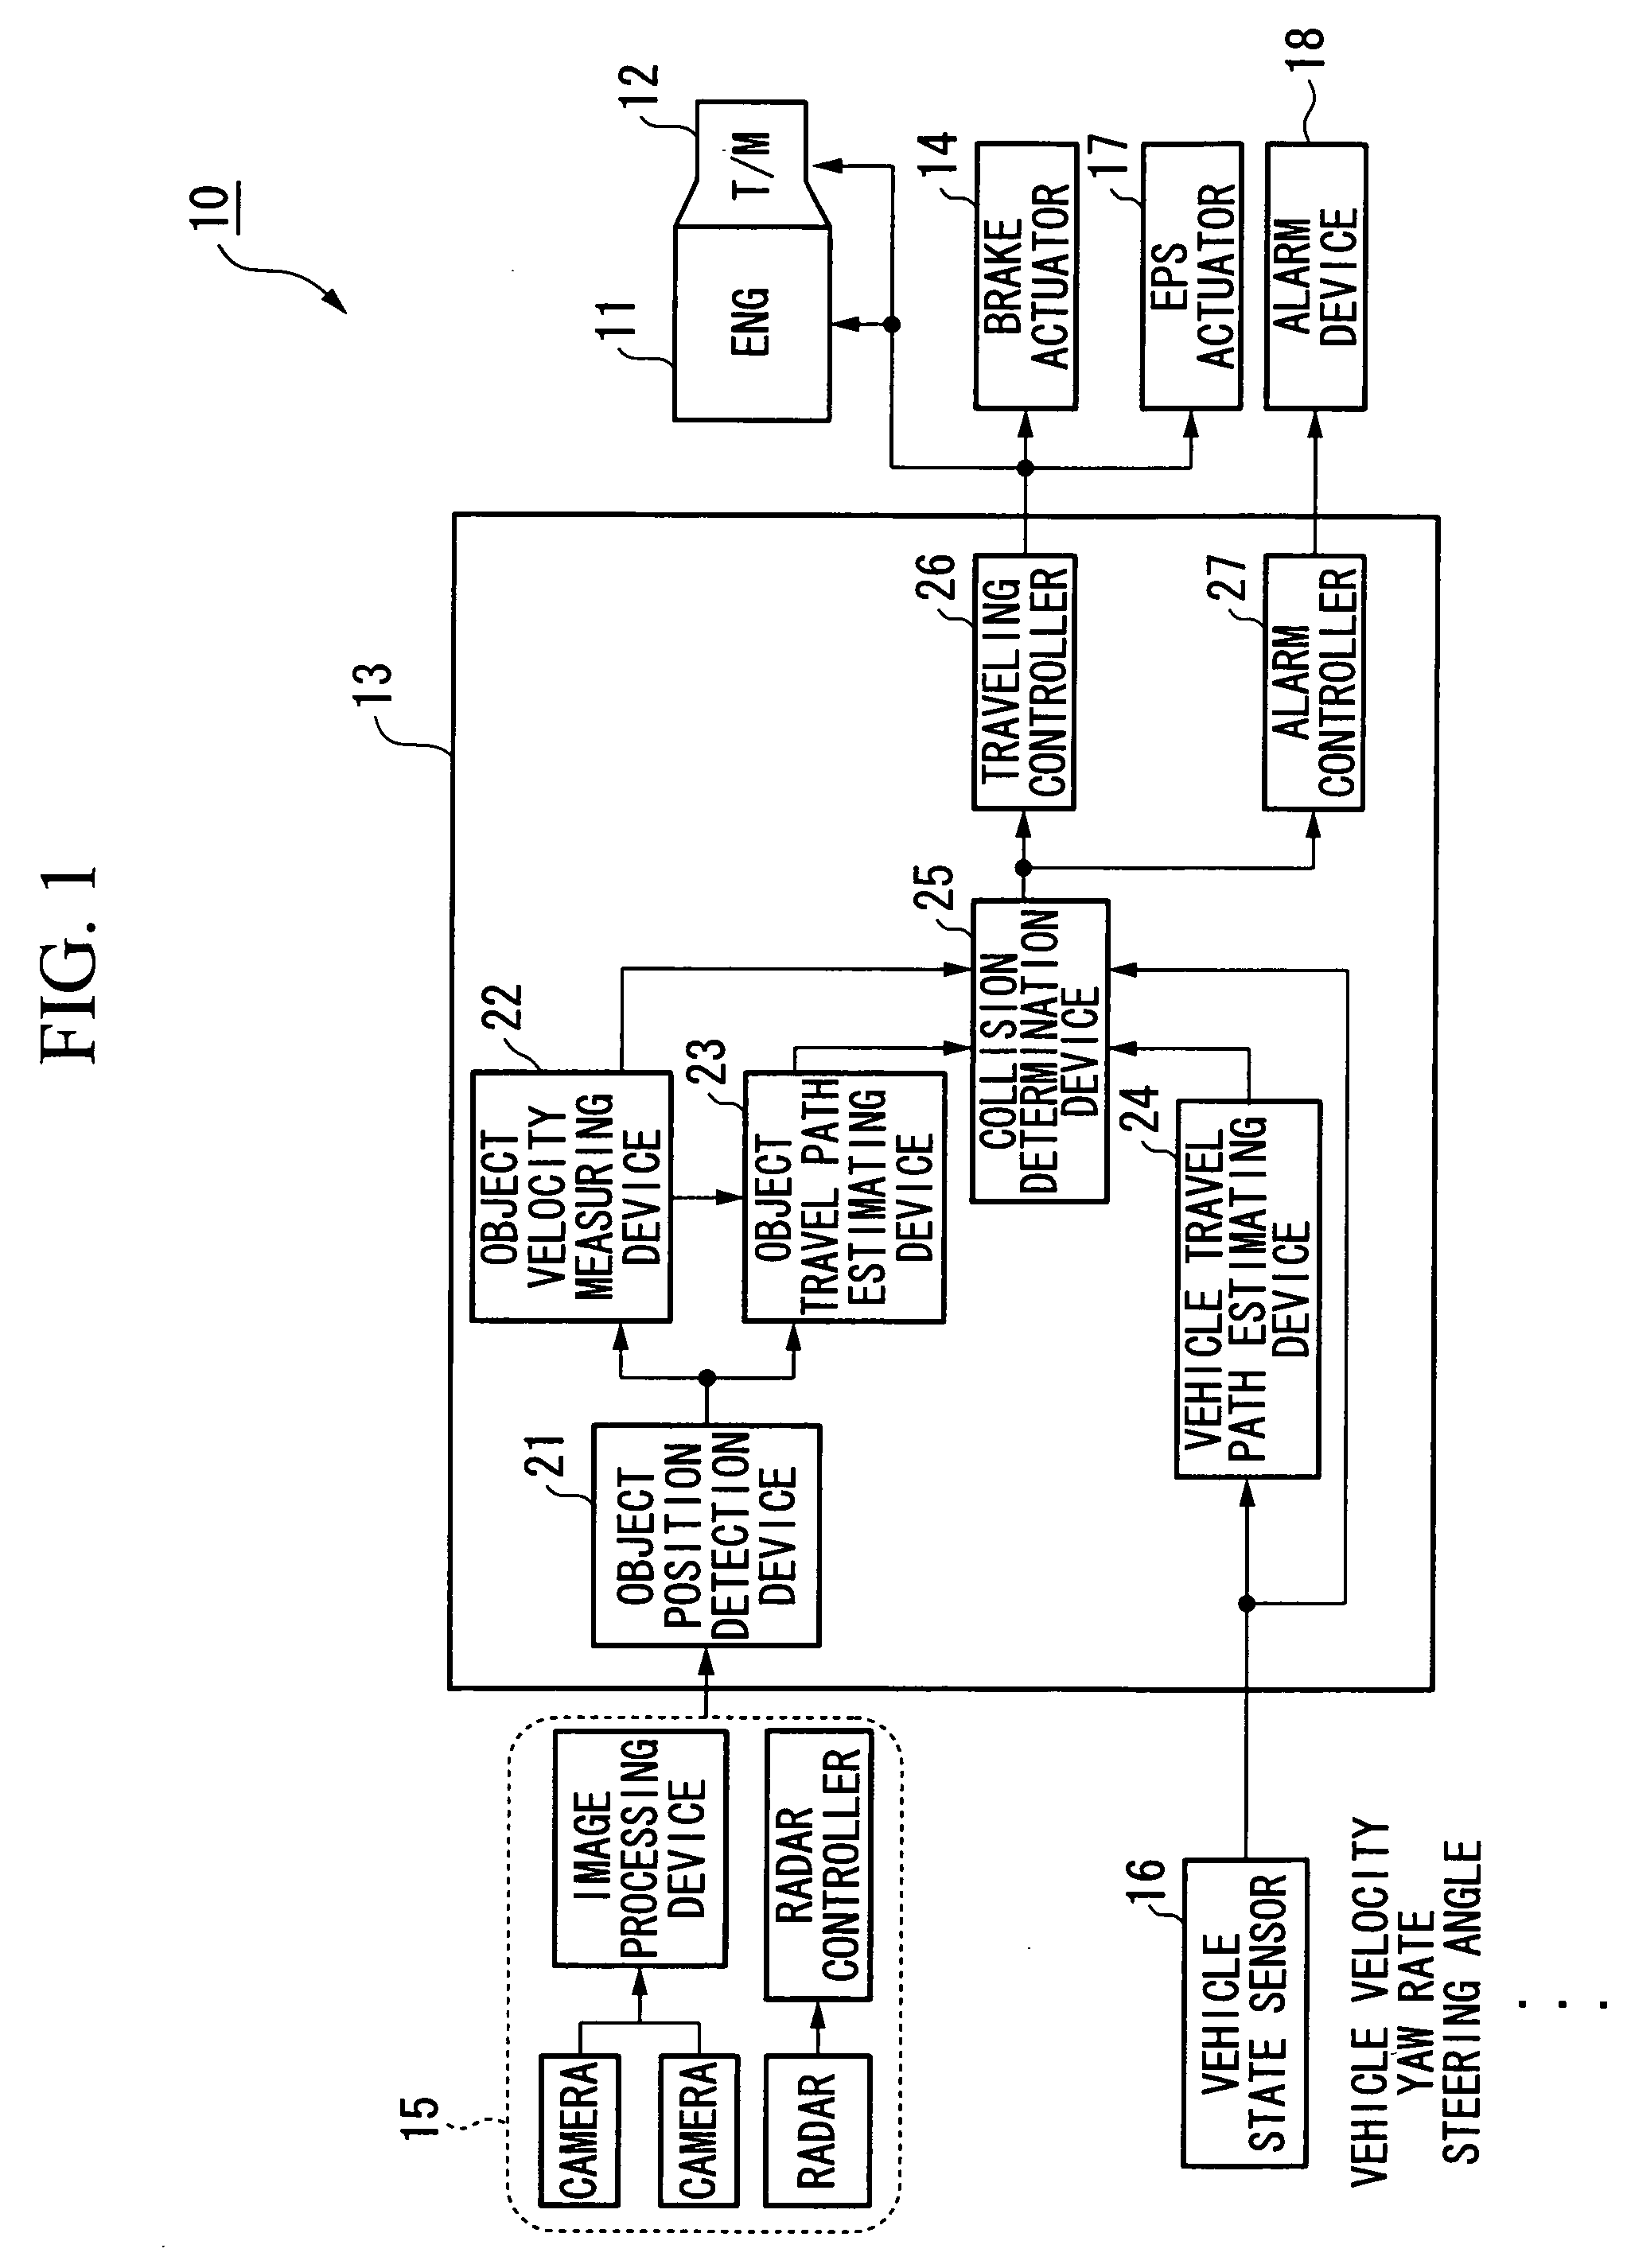 Travel safety apparatus for vehicle